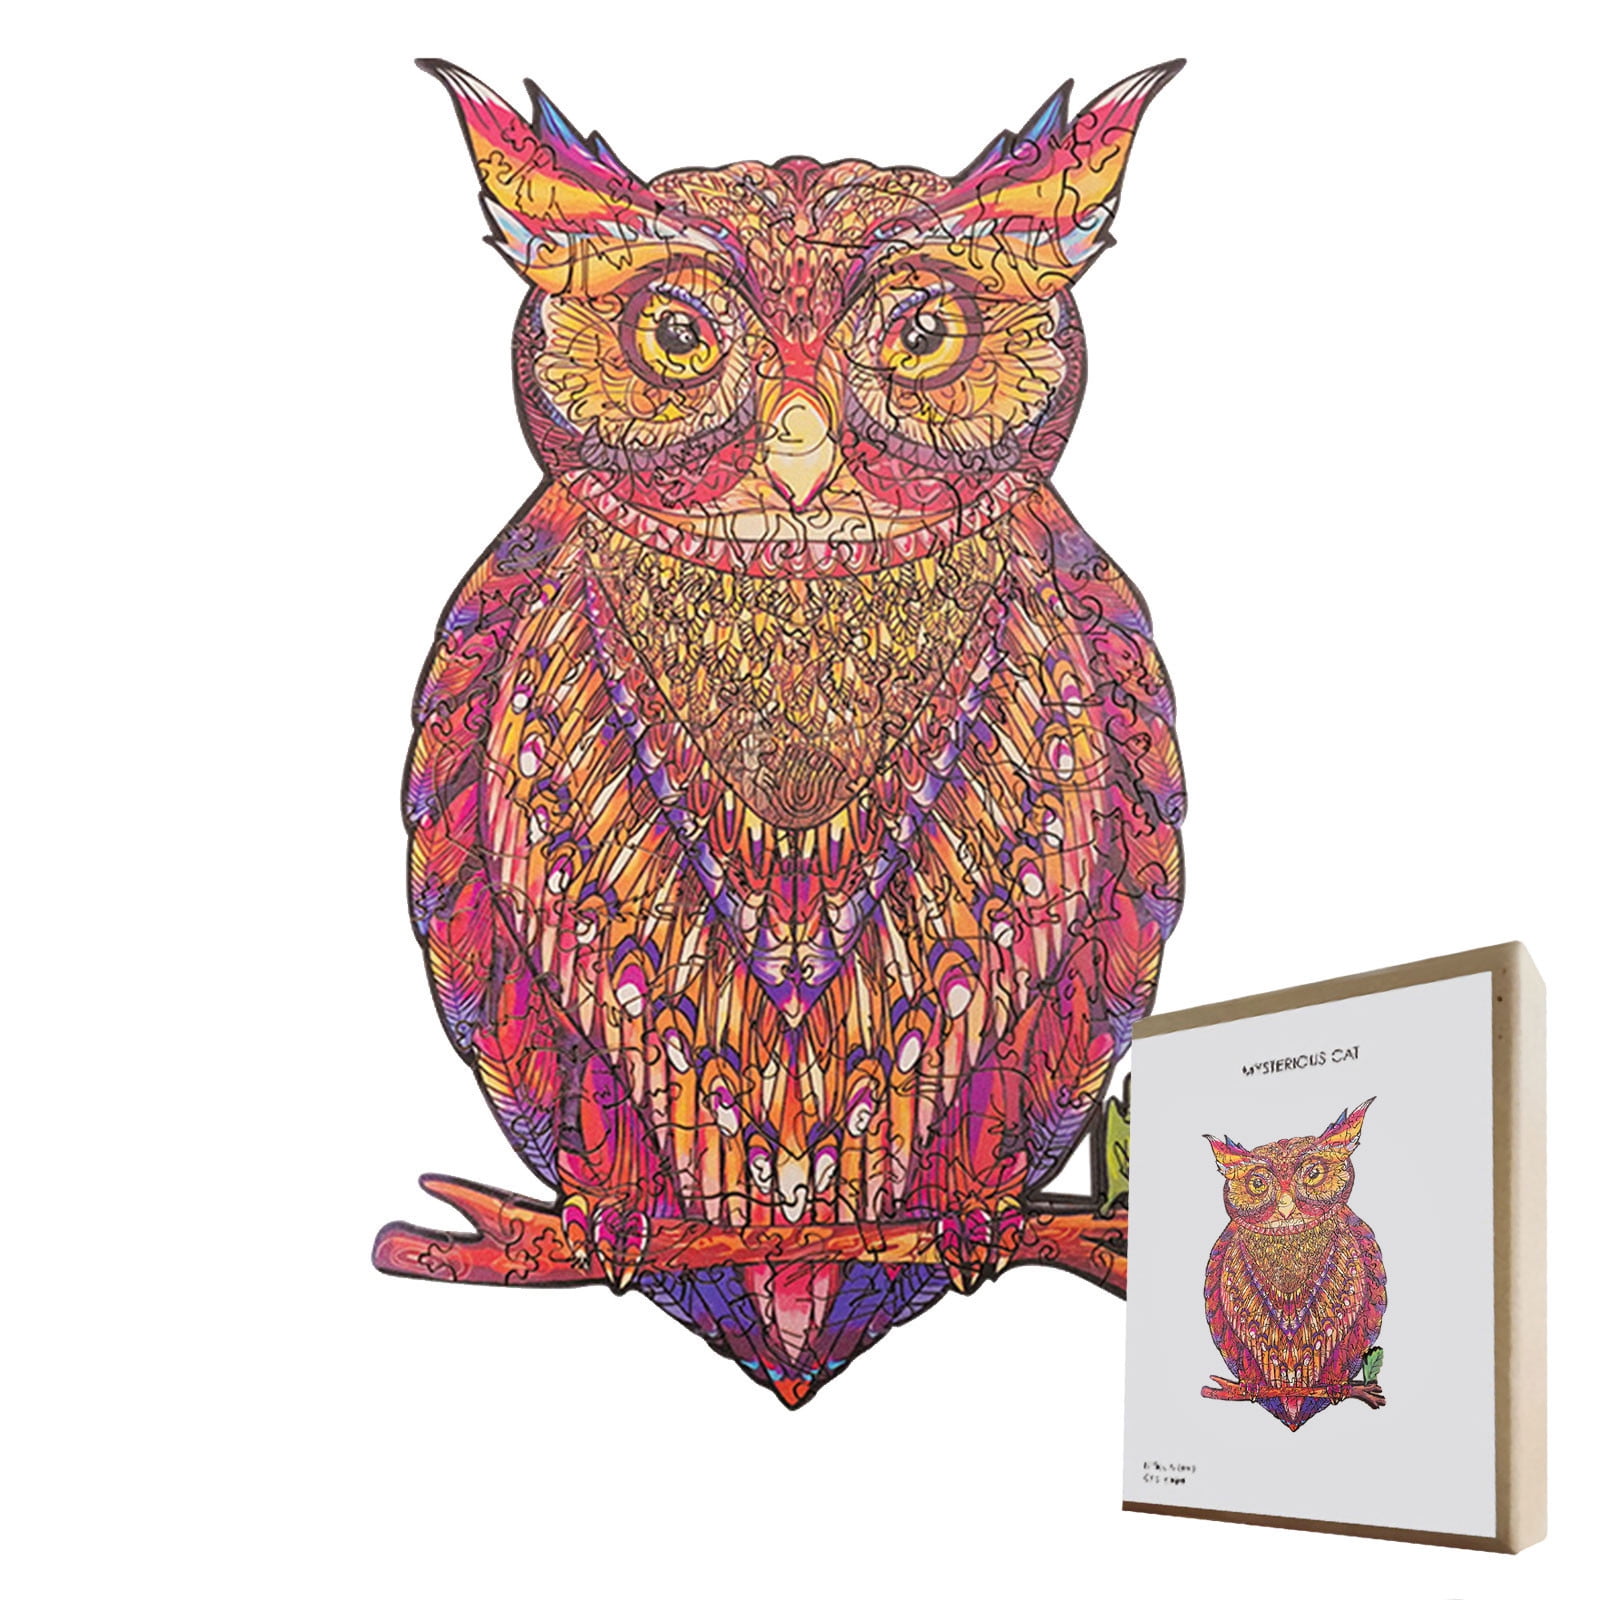 Owl Wooden Jigsaw Puzzles Unique Animal Jigsaw Pieces Best Gift Kids Adults 